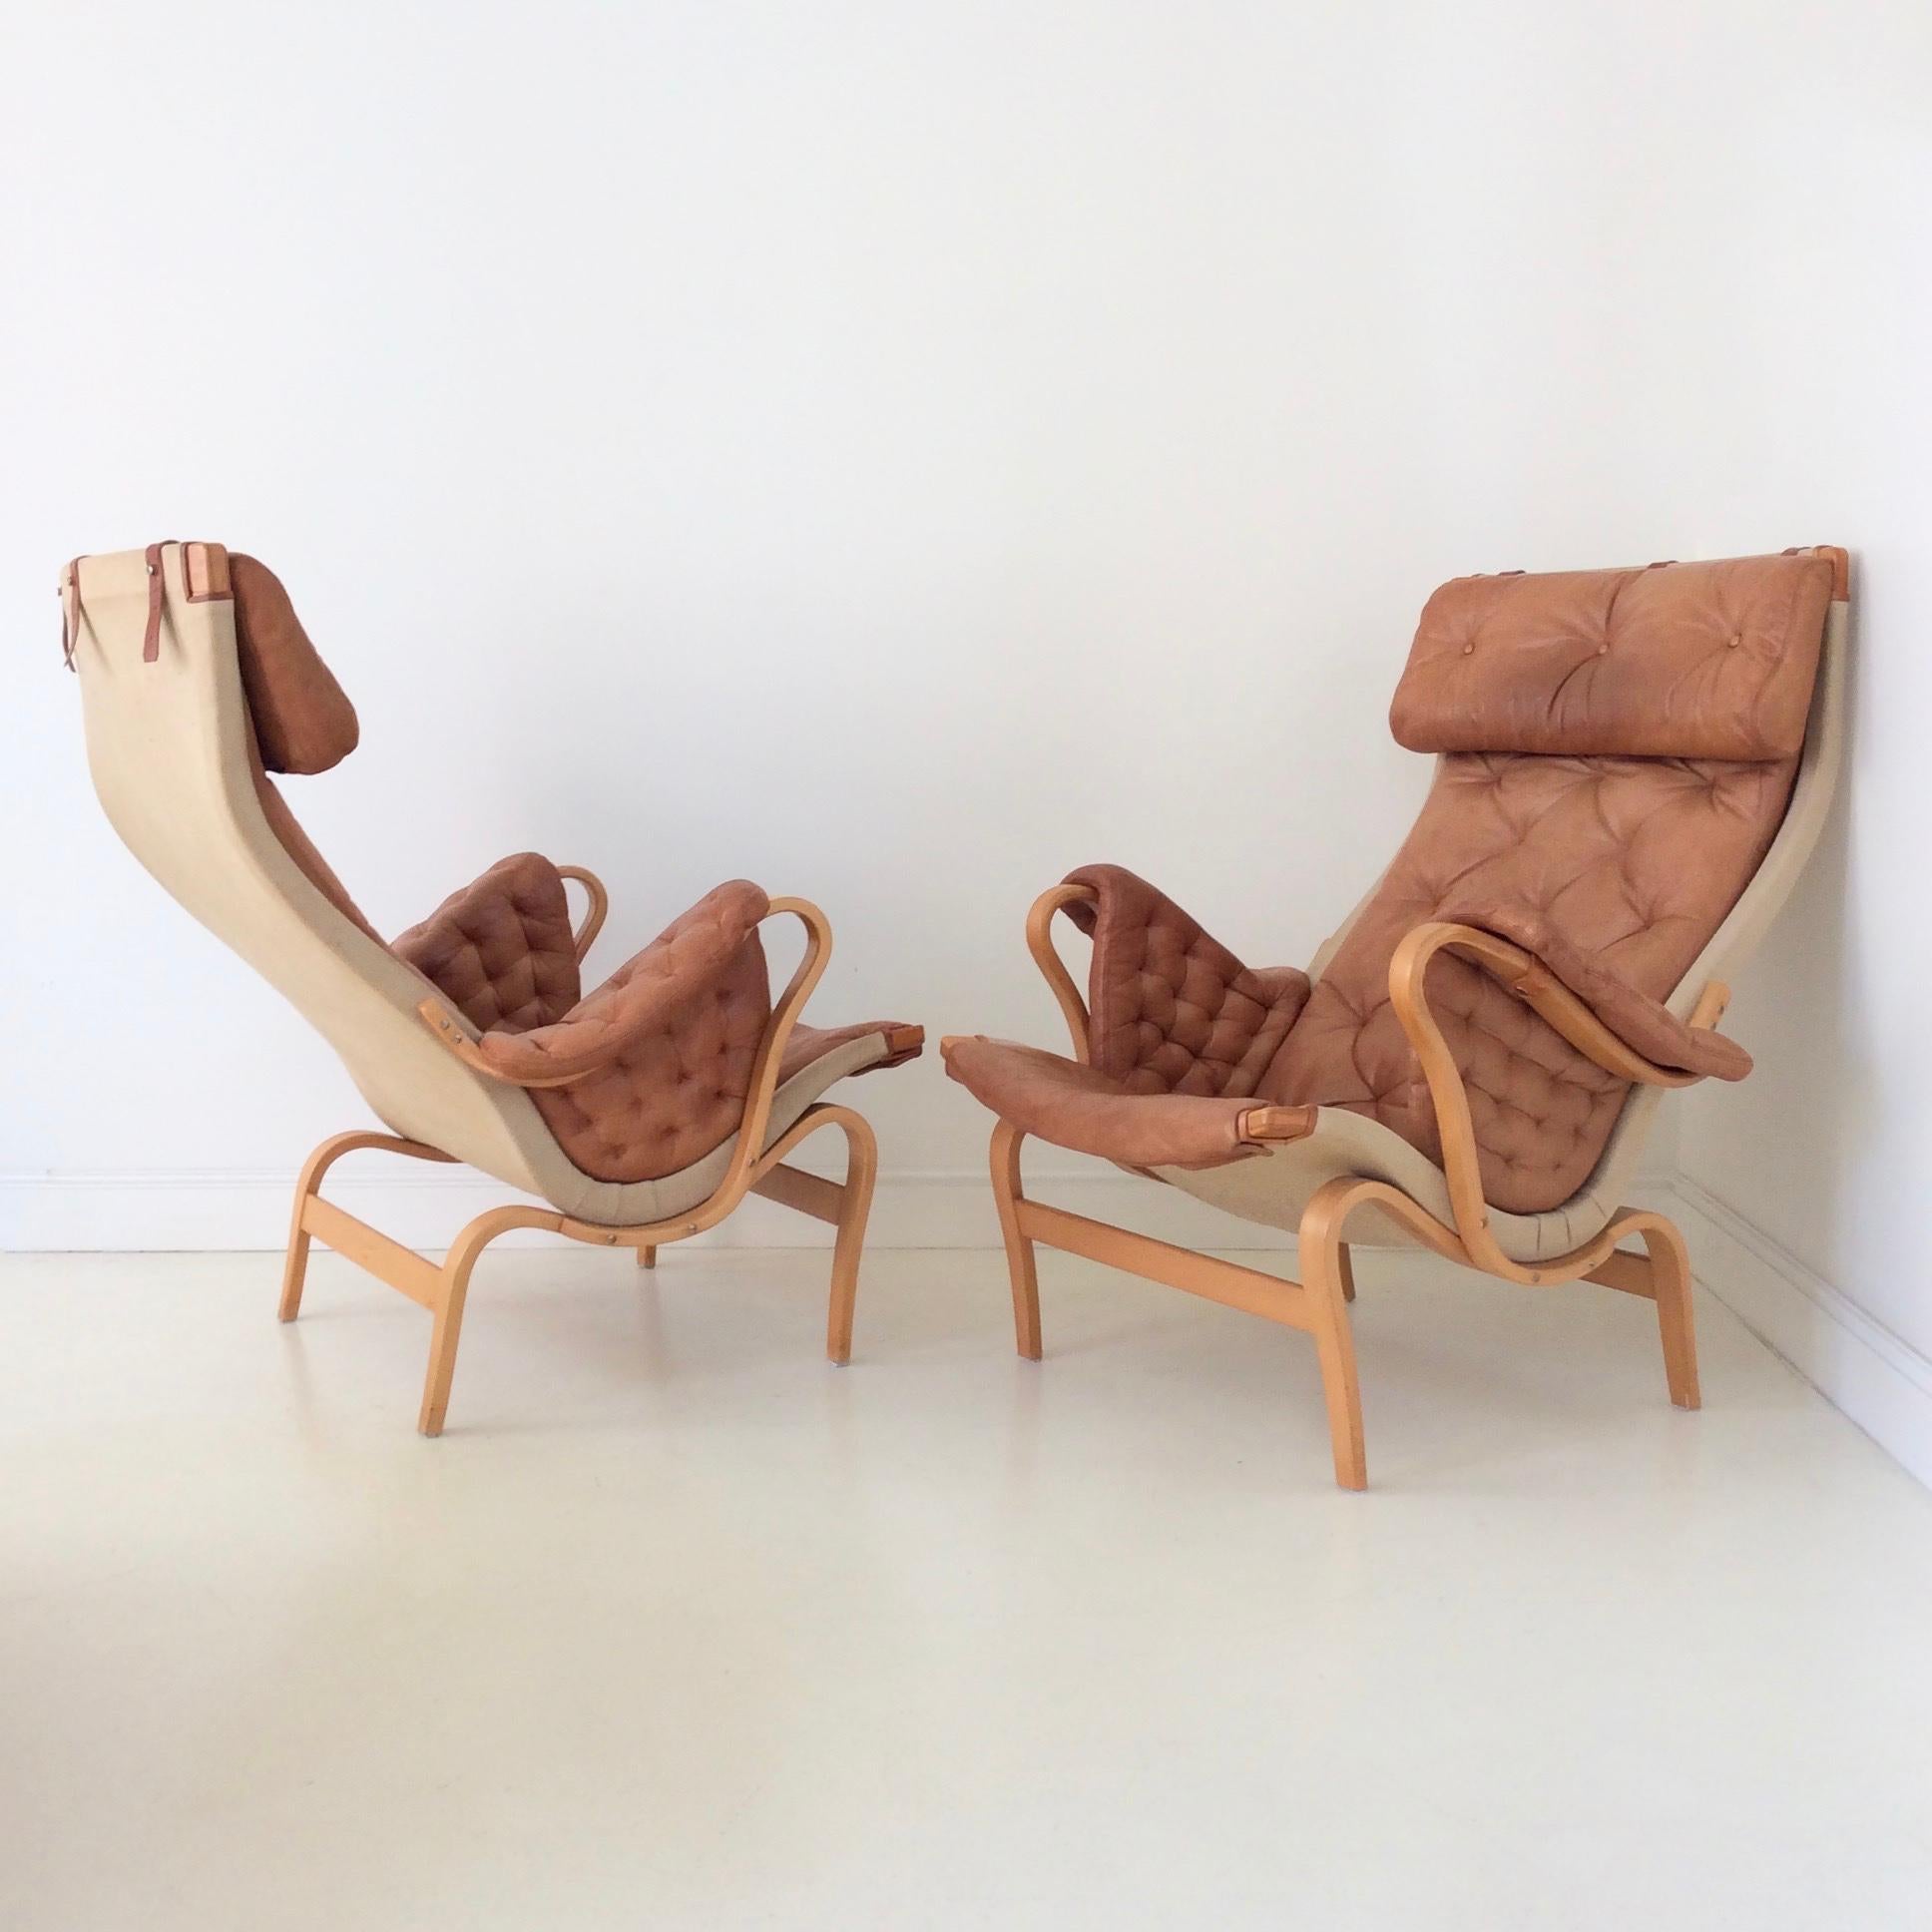 Swedish Pair of Cognac Leather Pernilla Armchairs by Bruno Mathsson, Sweden, circa 1970